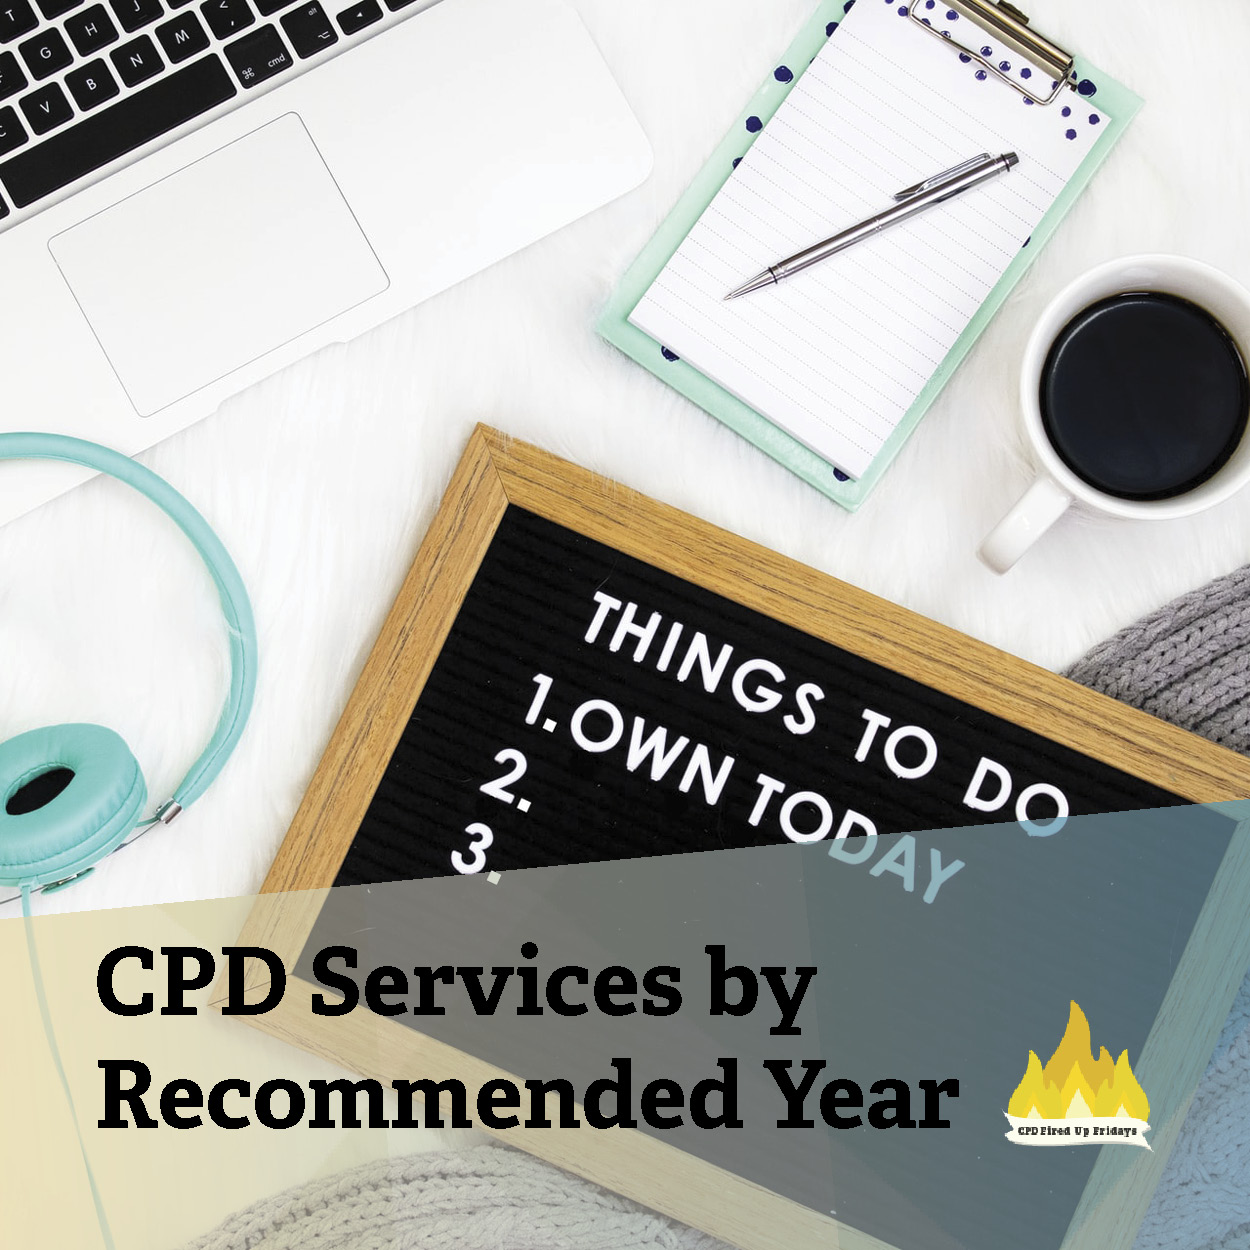 Seen from above, a white desk has sitting on it a teal coffee cup, a pair of teal headphones, and open laptop, and a small black letterboard with 'Things To Do Today' written on it. Underneath the image, text reads: 'CPD Services by Recommended Year.'